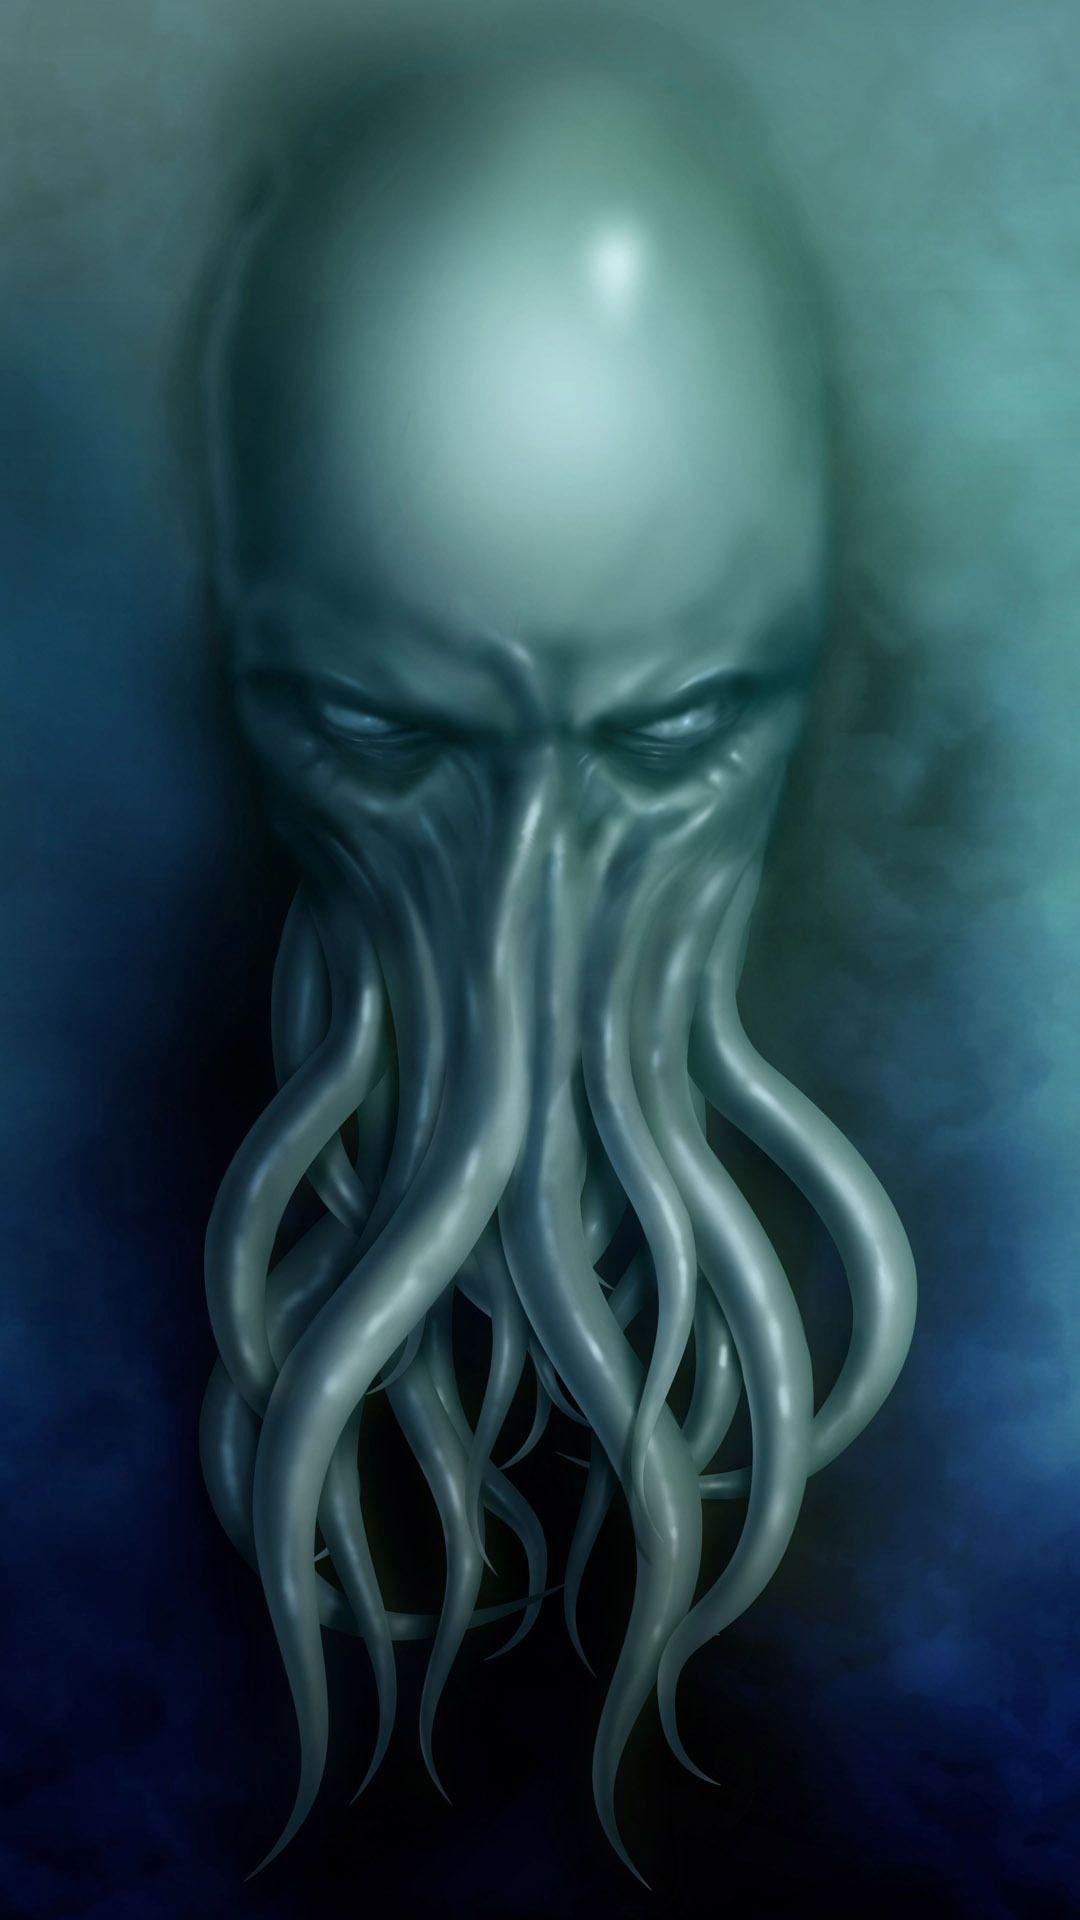 1080 x 1920 · jpeg - Cthulhu Phone Wallpapers Wallpapers - Top Free Cthulhu Phone Wallpapers ...